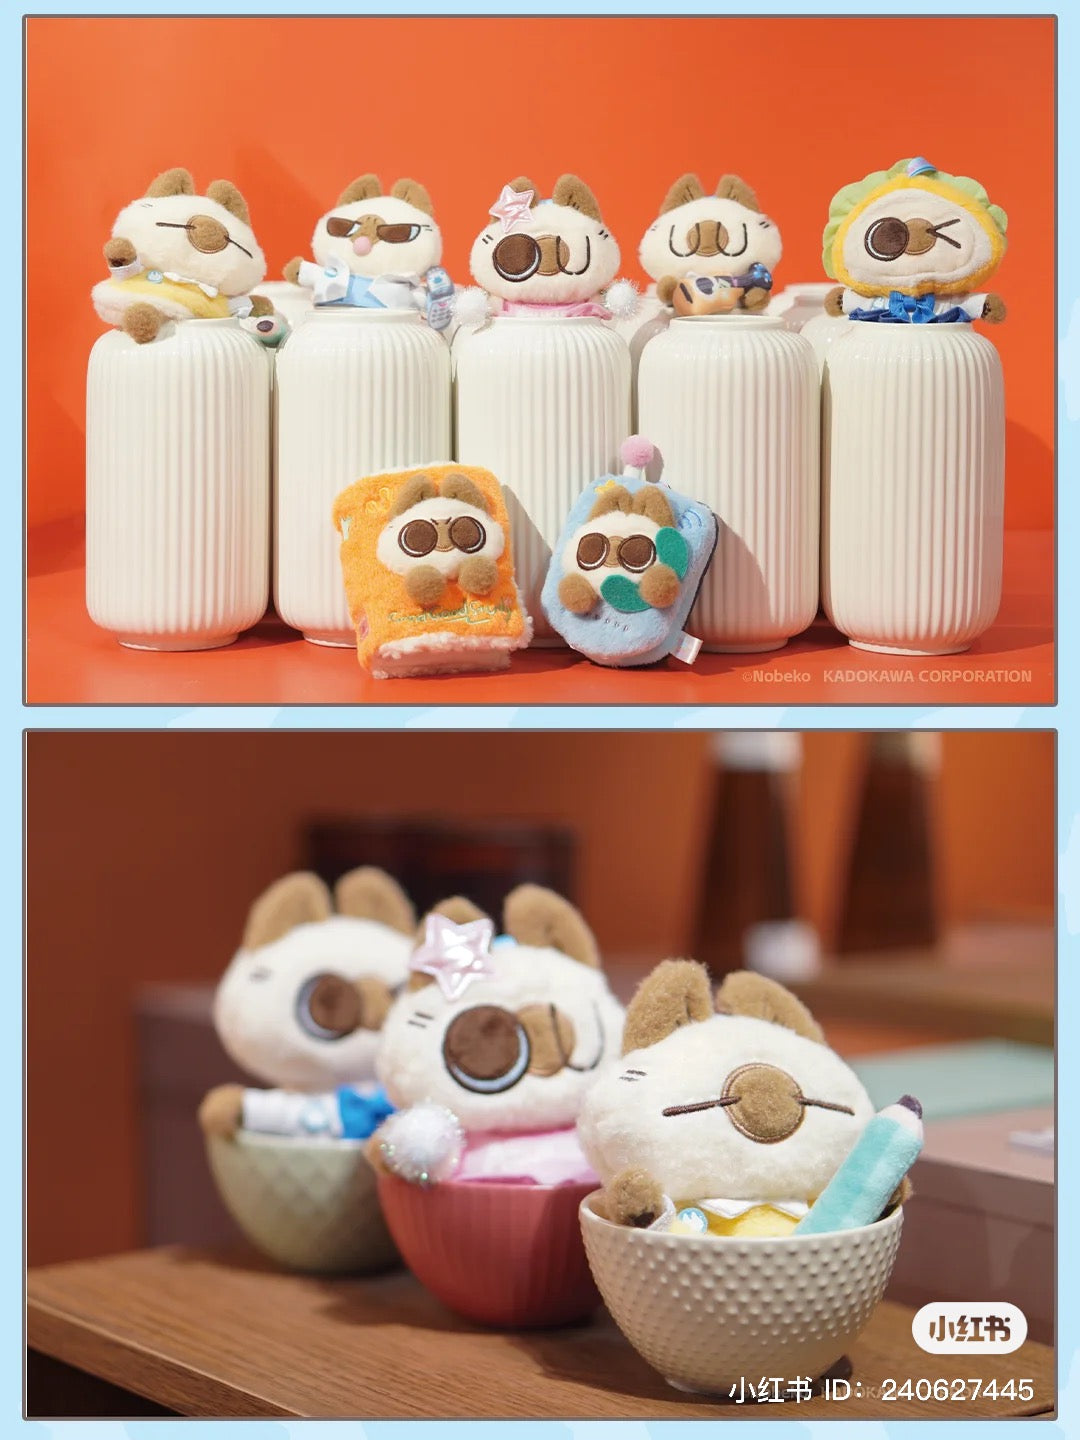 Alt text: Azukisan Campus Series Plush Blindbox with various stuffed animals displayed in bowls and books, available for preorder.